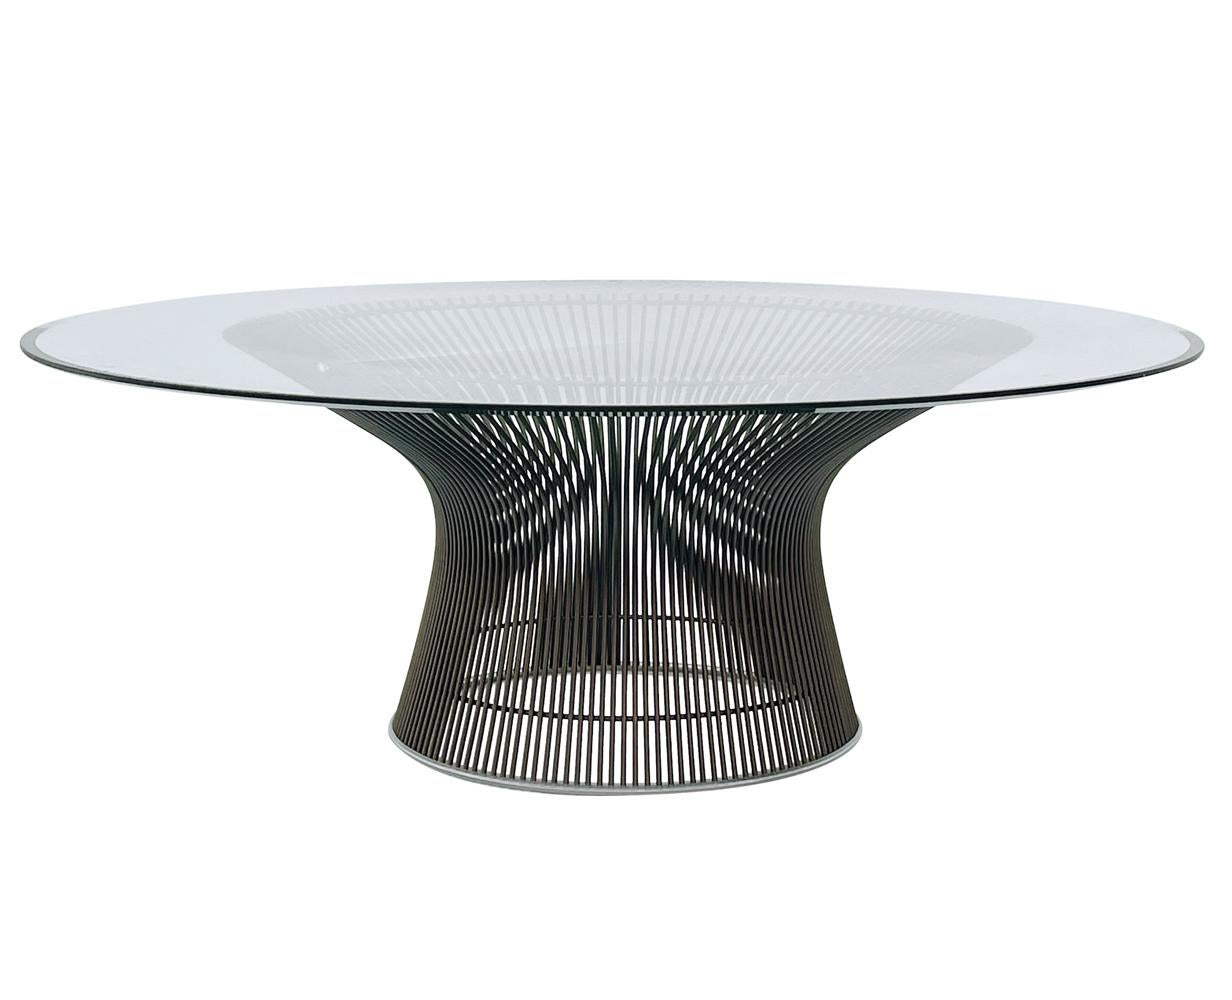 Authentic Mid-Century Modern Coffee Table by Warren Platner for Knoll in Bronze In Good Condition For Sale In Philadelphia, PA